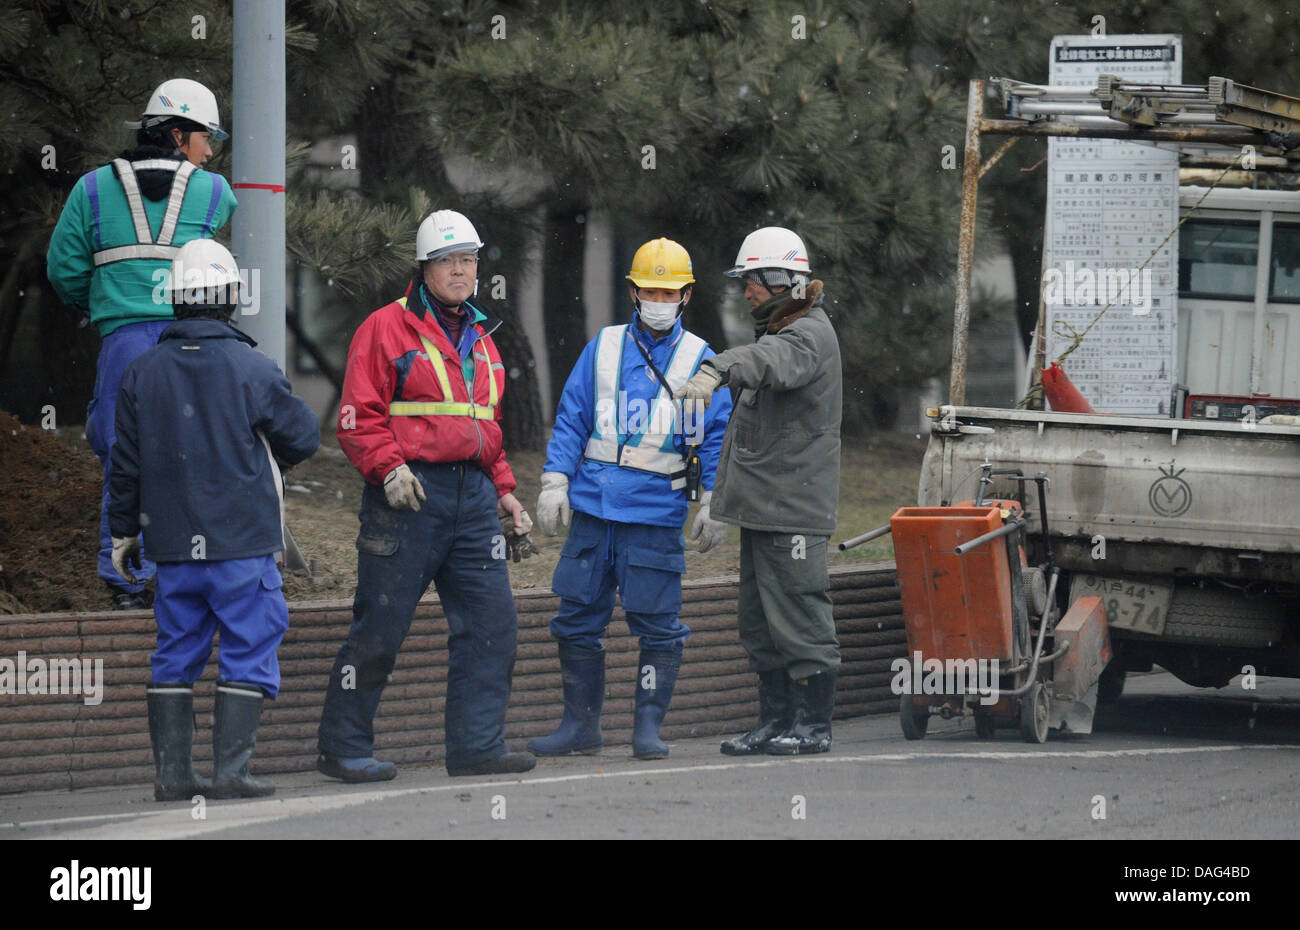 Employees repare power lines near the harbour Hachinohe, Japan, 17 March 2011. The north region of Misawa struggles with petrol shortages. Fuel oil, electricity and water supplies are stable. Photo: HANNIBAL Stock Photo